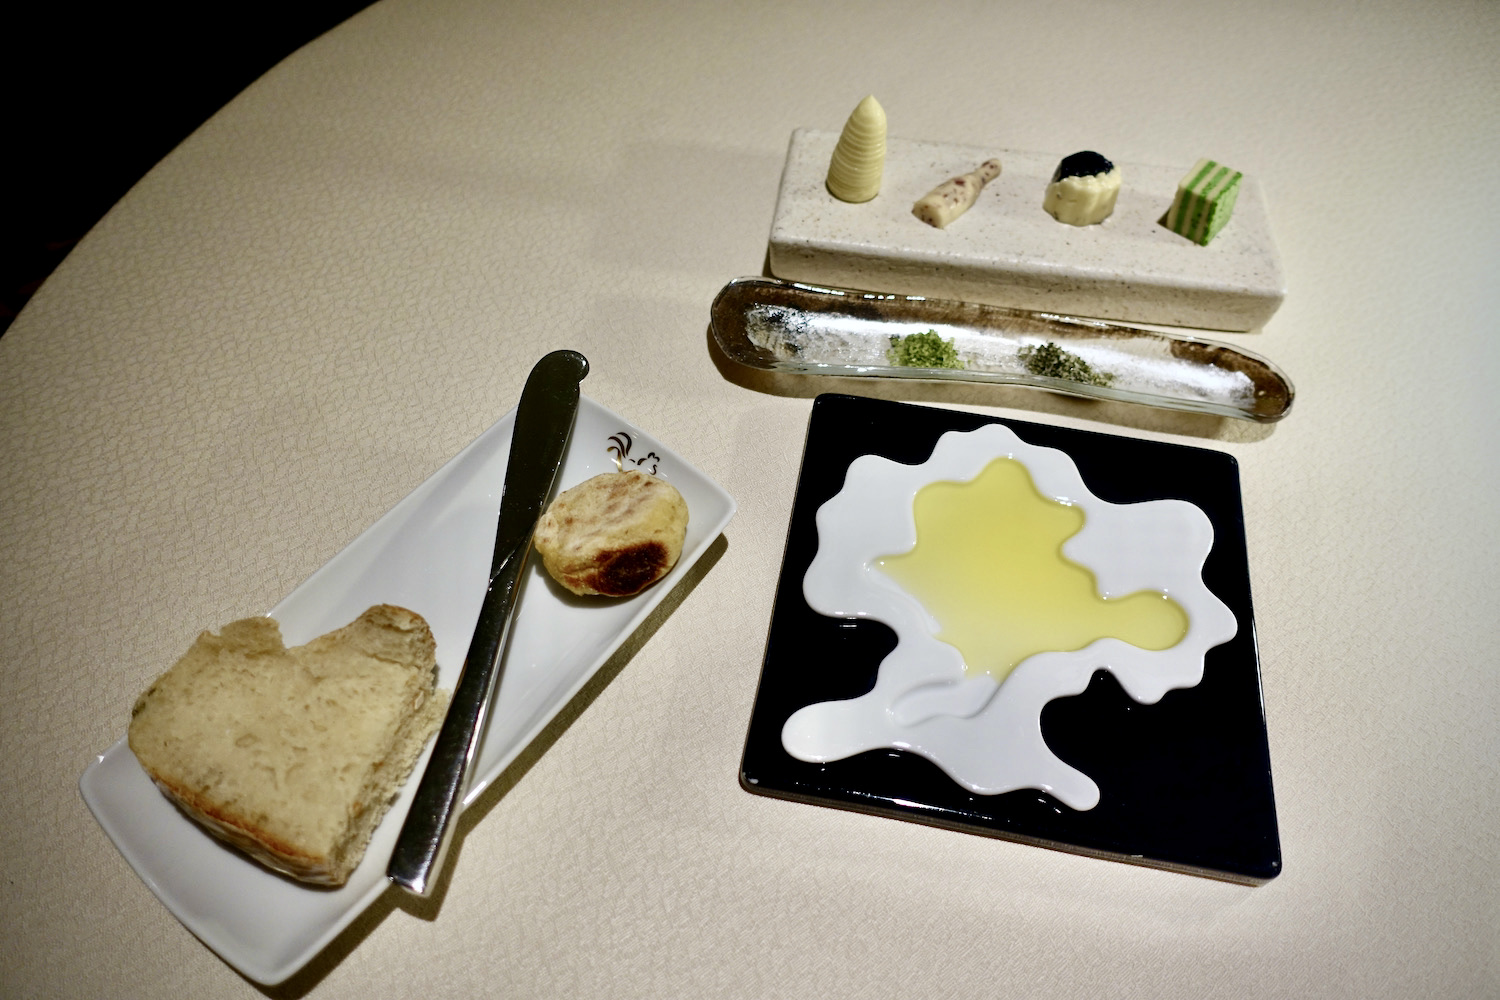 butter, salt and bread at Madeira highest rated Michelin restaurants, Ill Gallo d'Oro